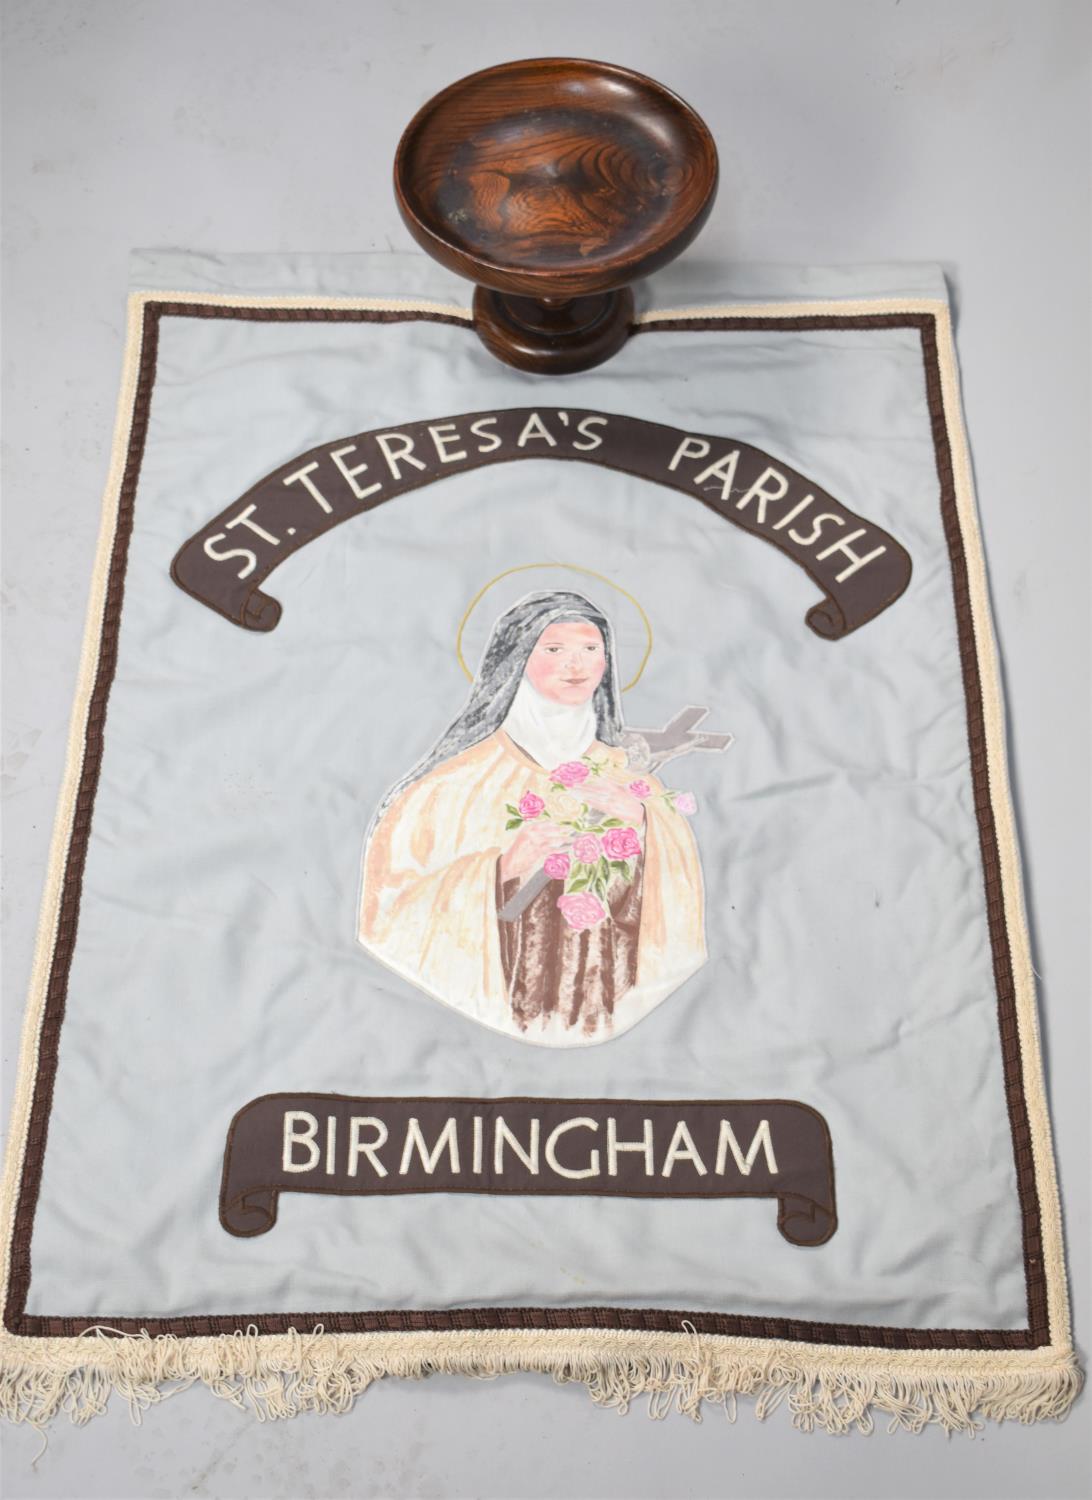 A Religious Banner for St. Teresa's Parish Birmingham, Together with a Turned Oak Fruit Bowl Which